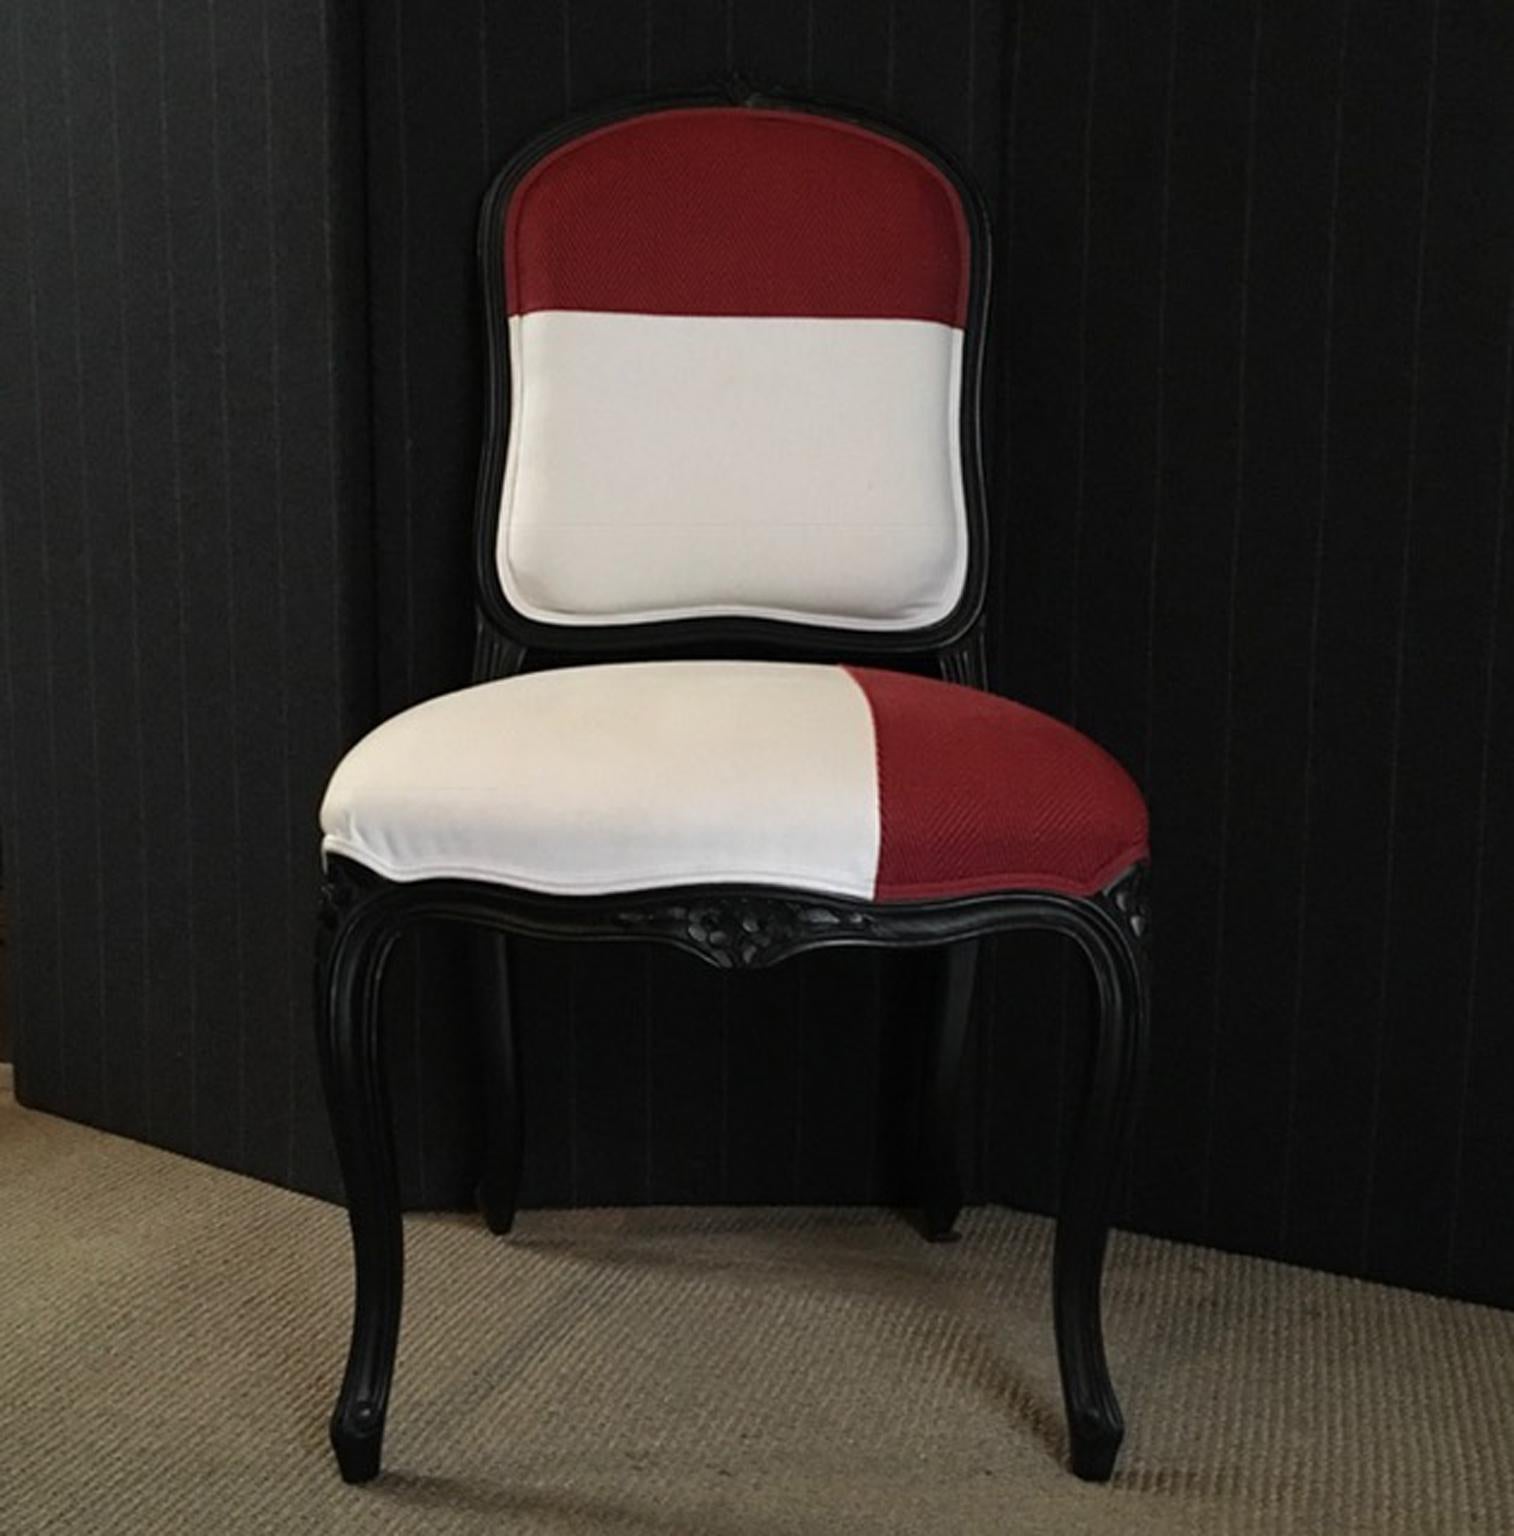 French Provincial Lacquered Black Wood Dining Chair Upholstered Red and White For Sale 2